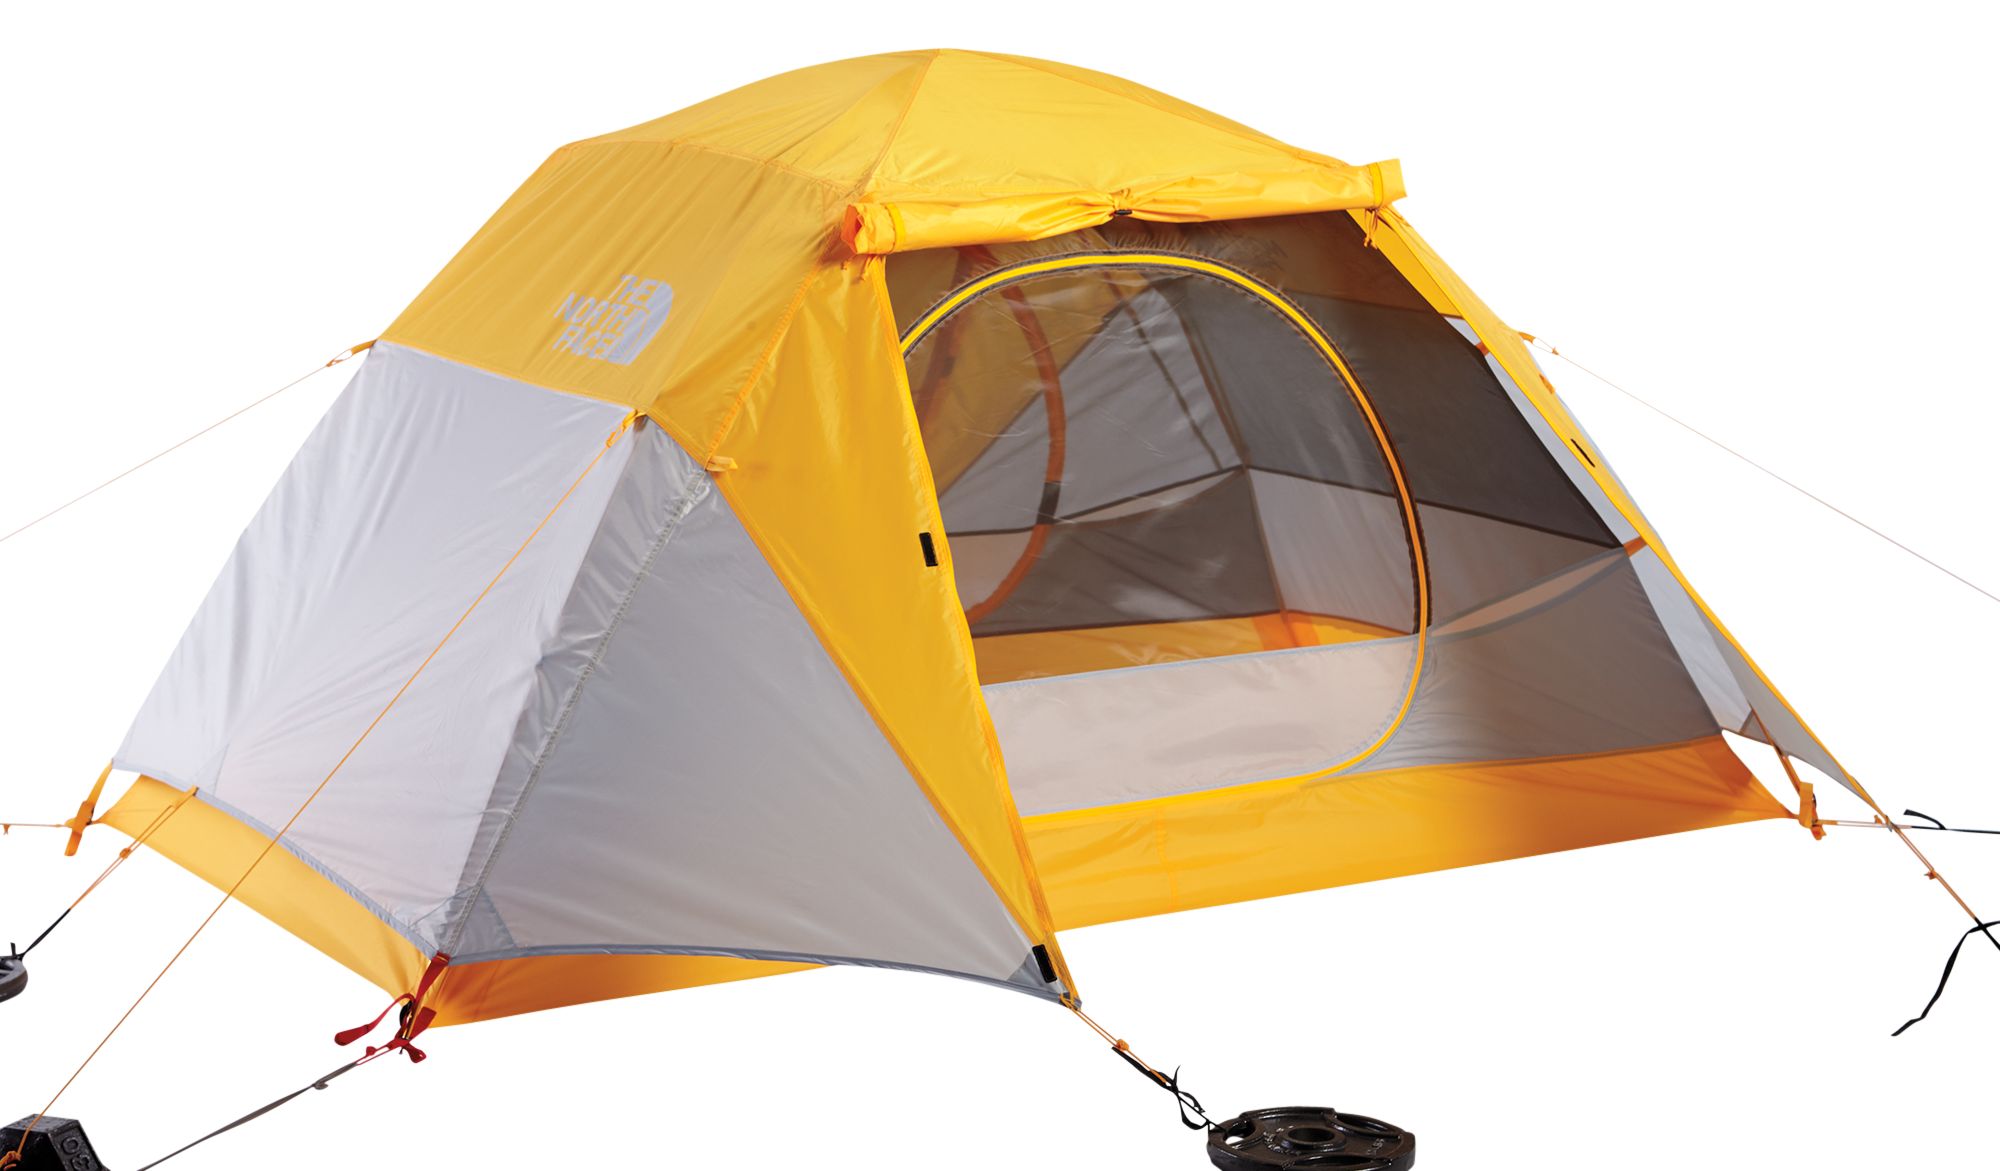 Dicks 2 person tent